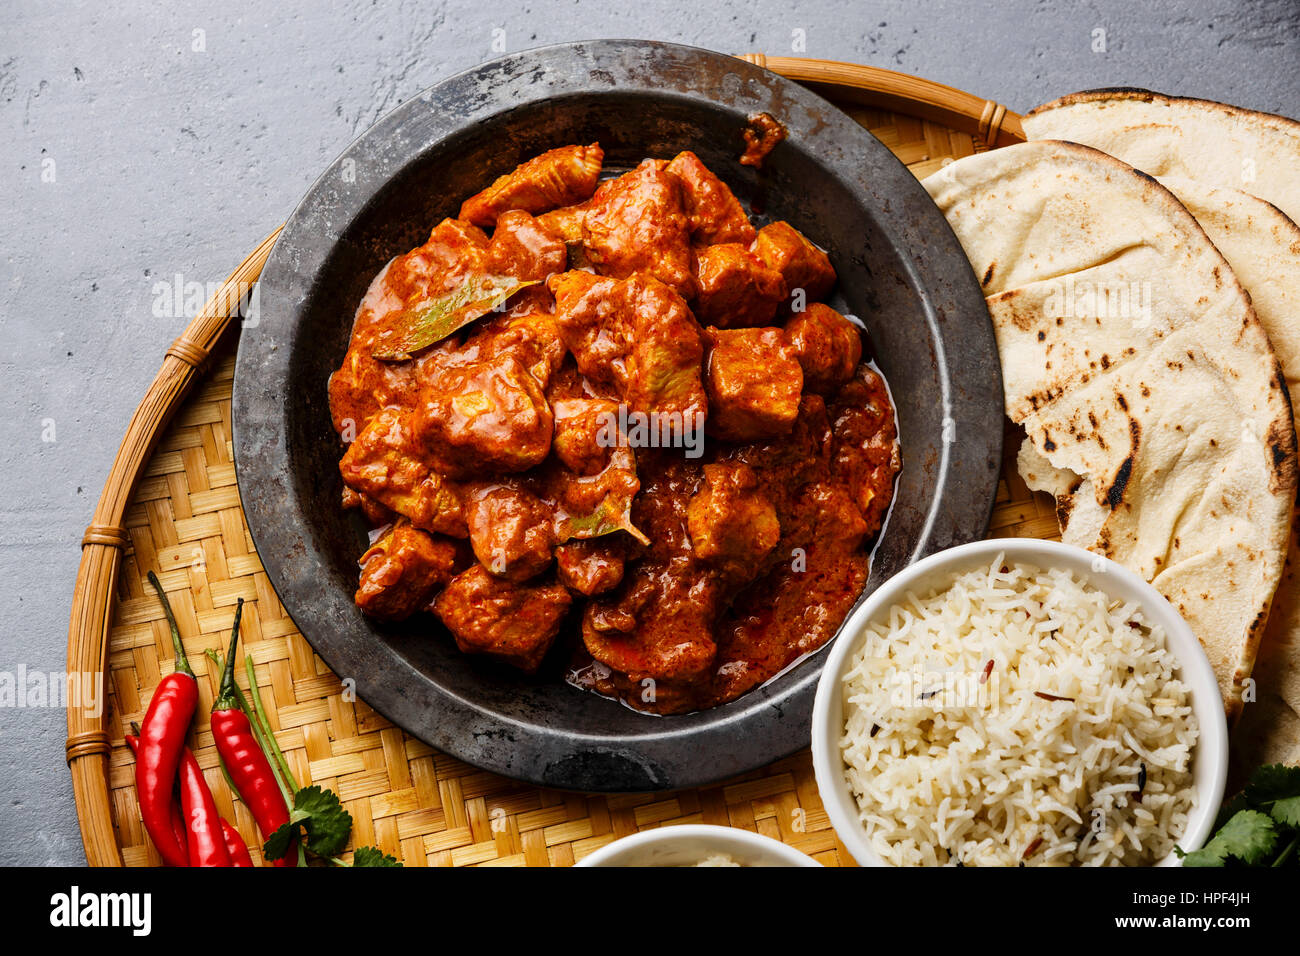 Chicken tikka masala spicy curry meat food in metal plate, rice and naan bread close-up Stock Photo